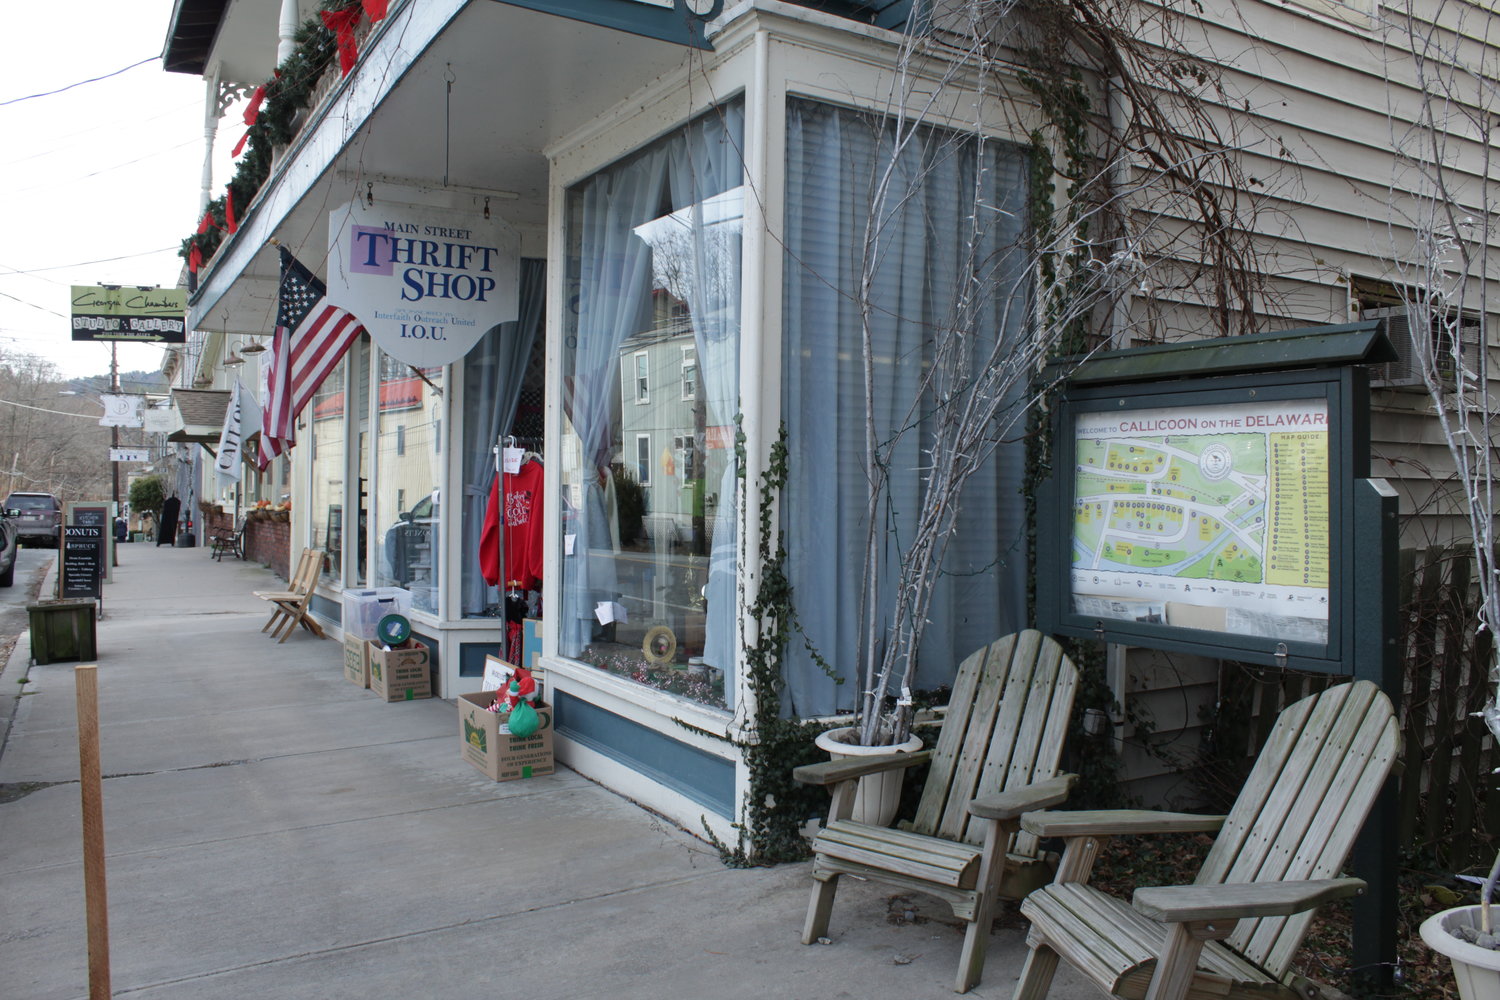 The Main Street Thrift Shop in Callicoon.